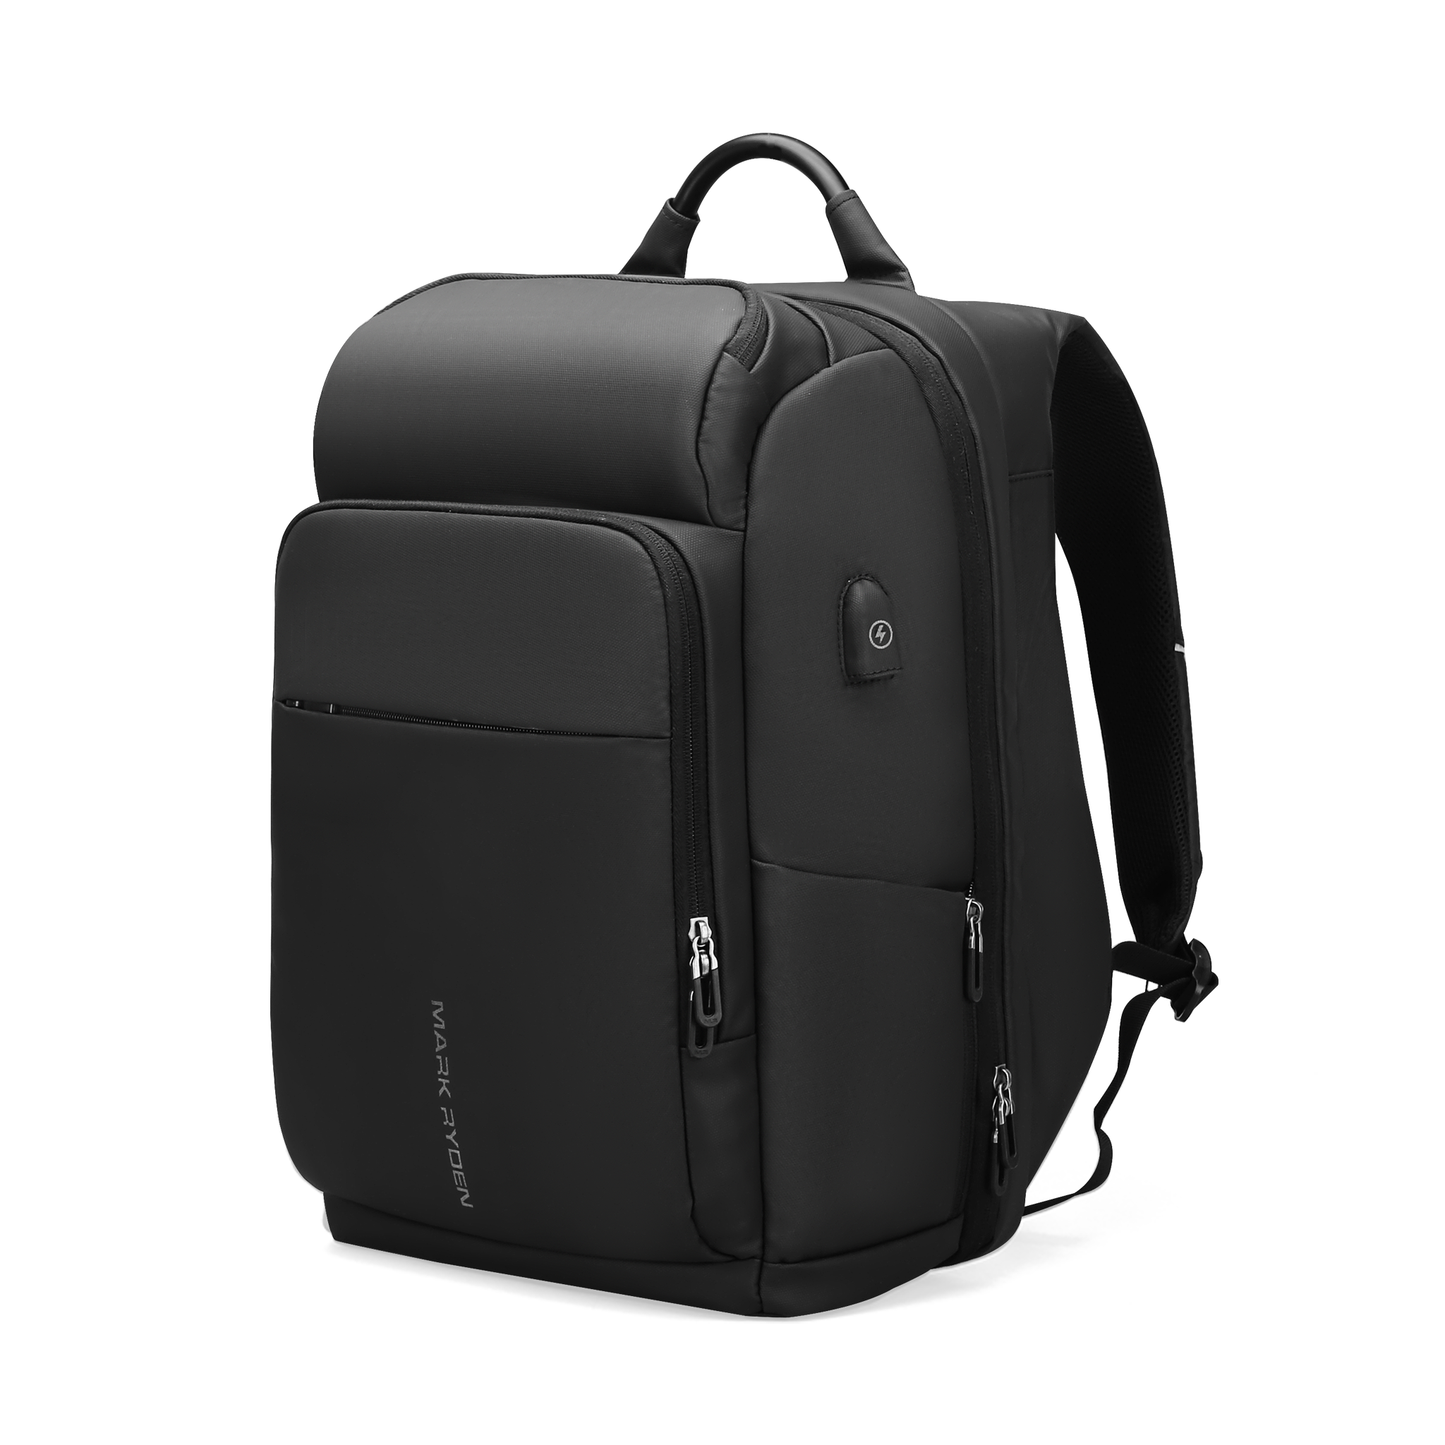 Compacto: The Versatile Spacious Carry-On Laptop Backpack